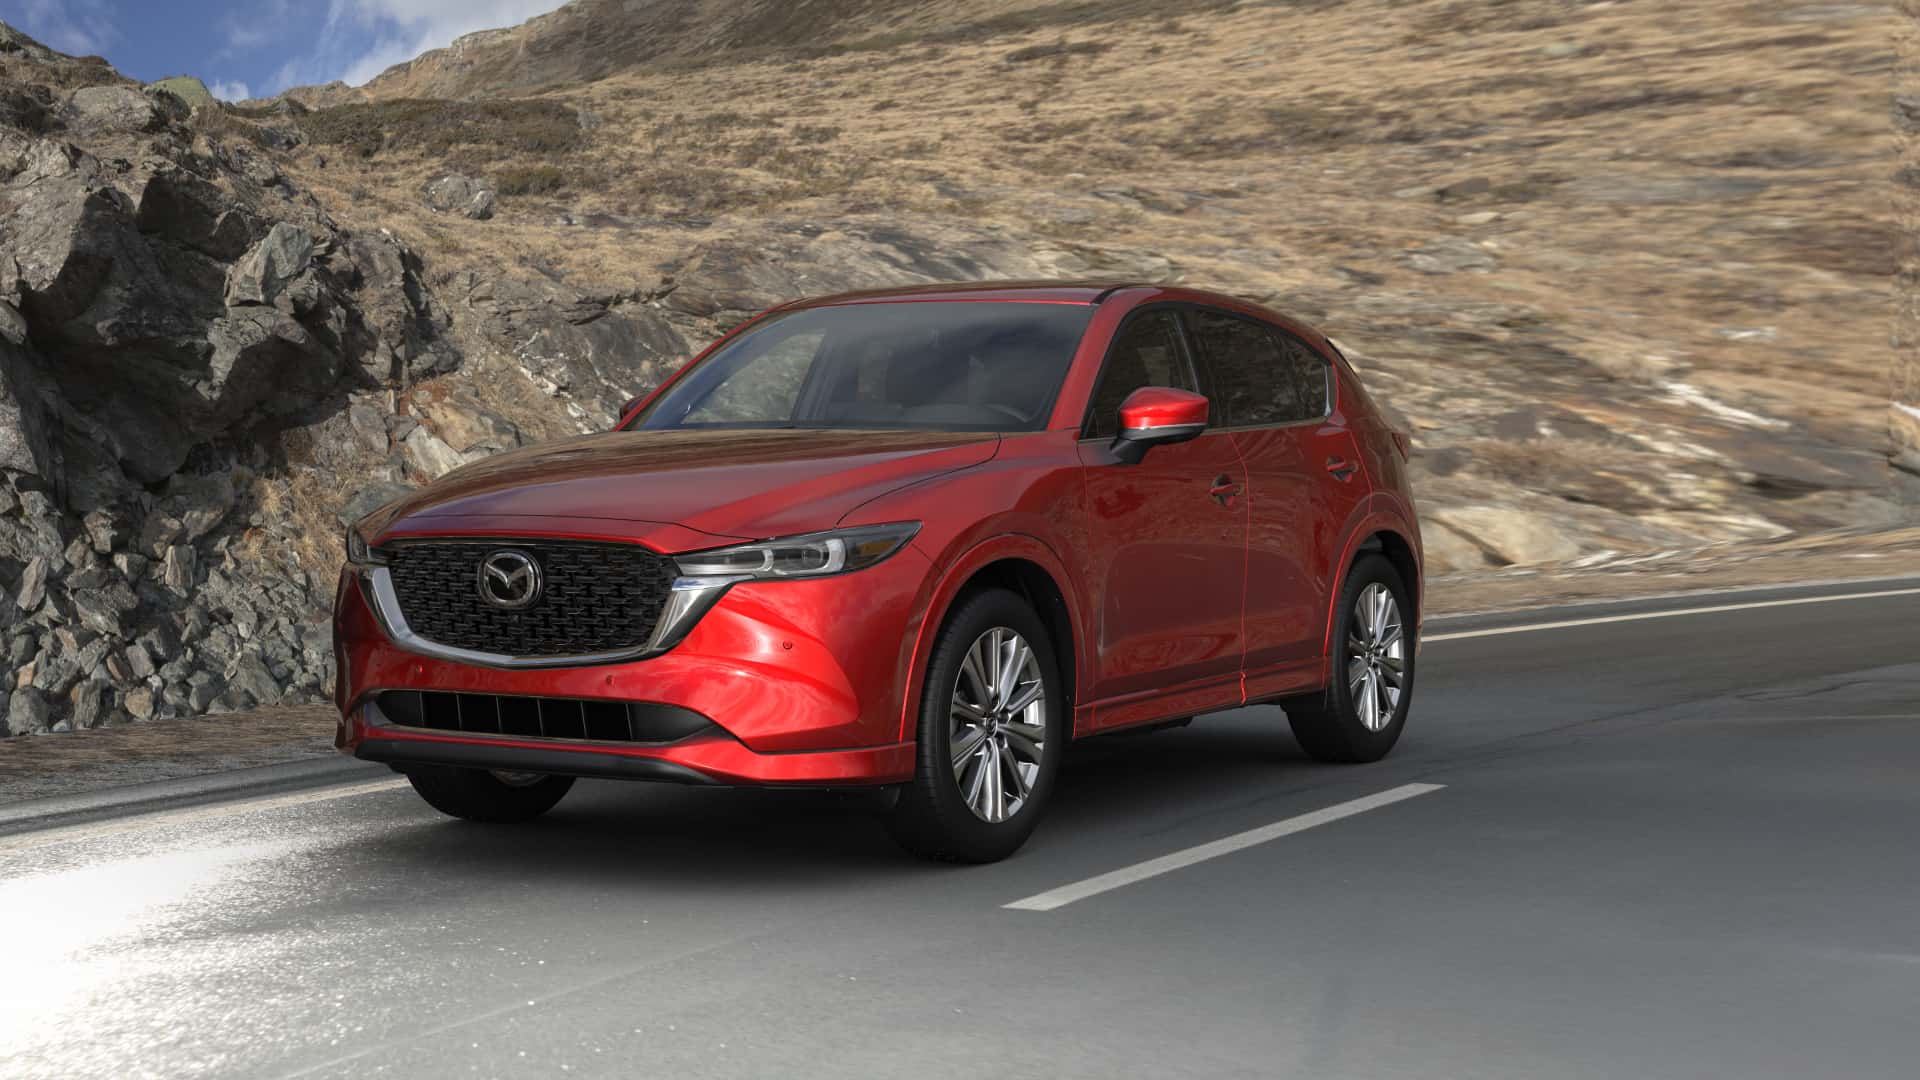 2023 Mazda CX-5 2.5 Turbo Signature Soul Red Crystal Metallic | Russell & Smith Mazda in Houston TX